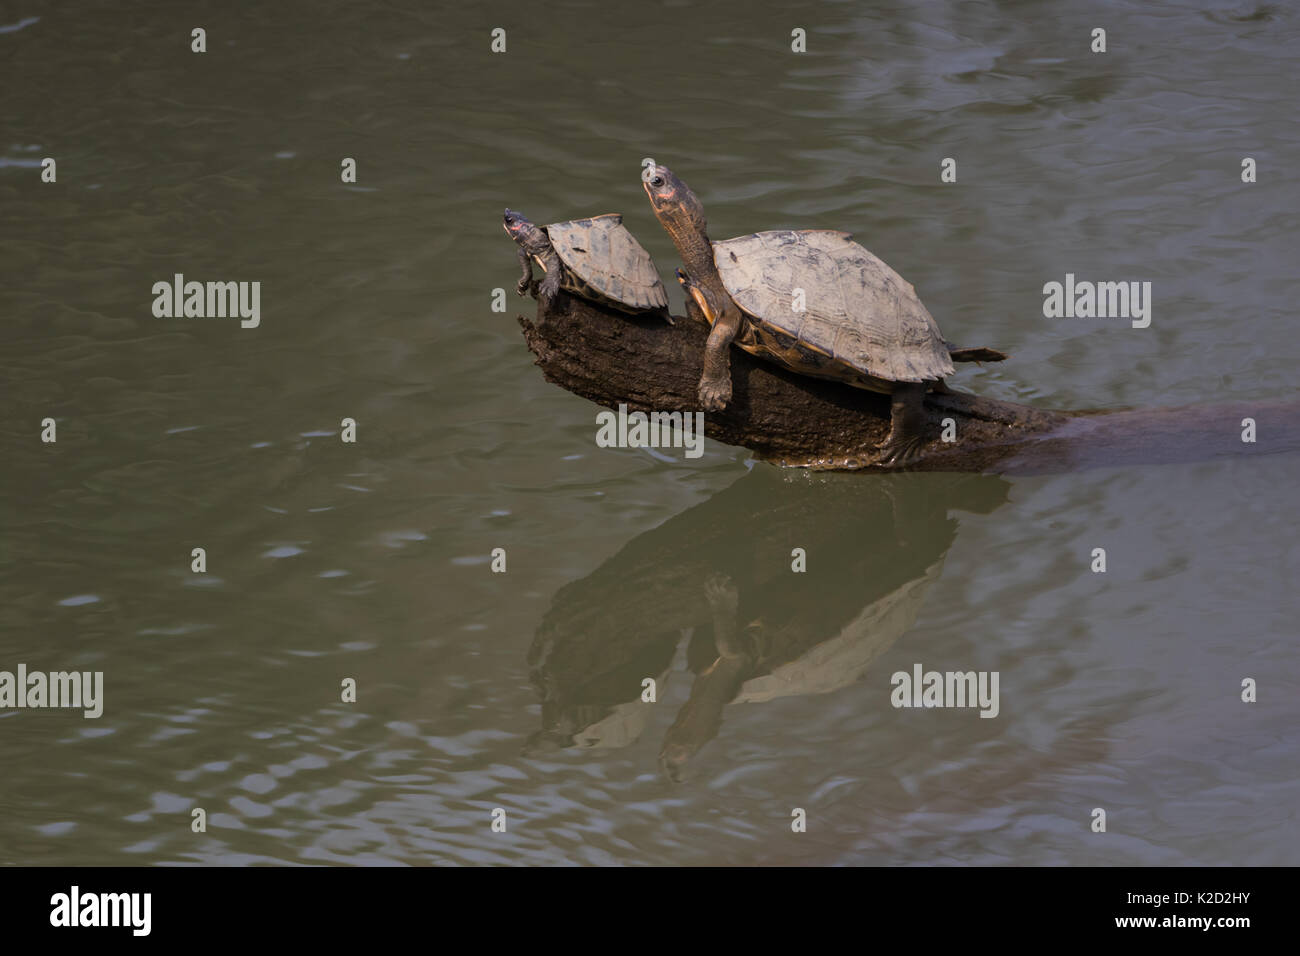 The Assam roofed turtle (Pangshura sylhetensis) also known as Sylhet roofed turtle  in the Brahmaputra river in Kaziranga National Park, Assam, India Stock Photo